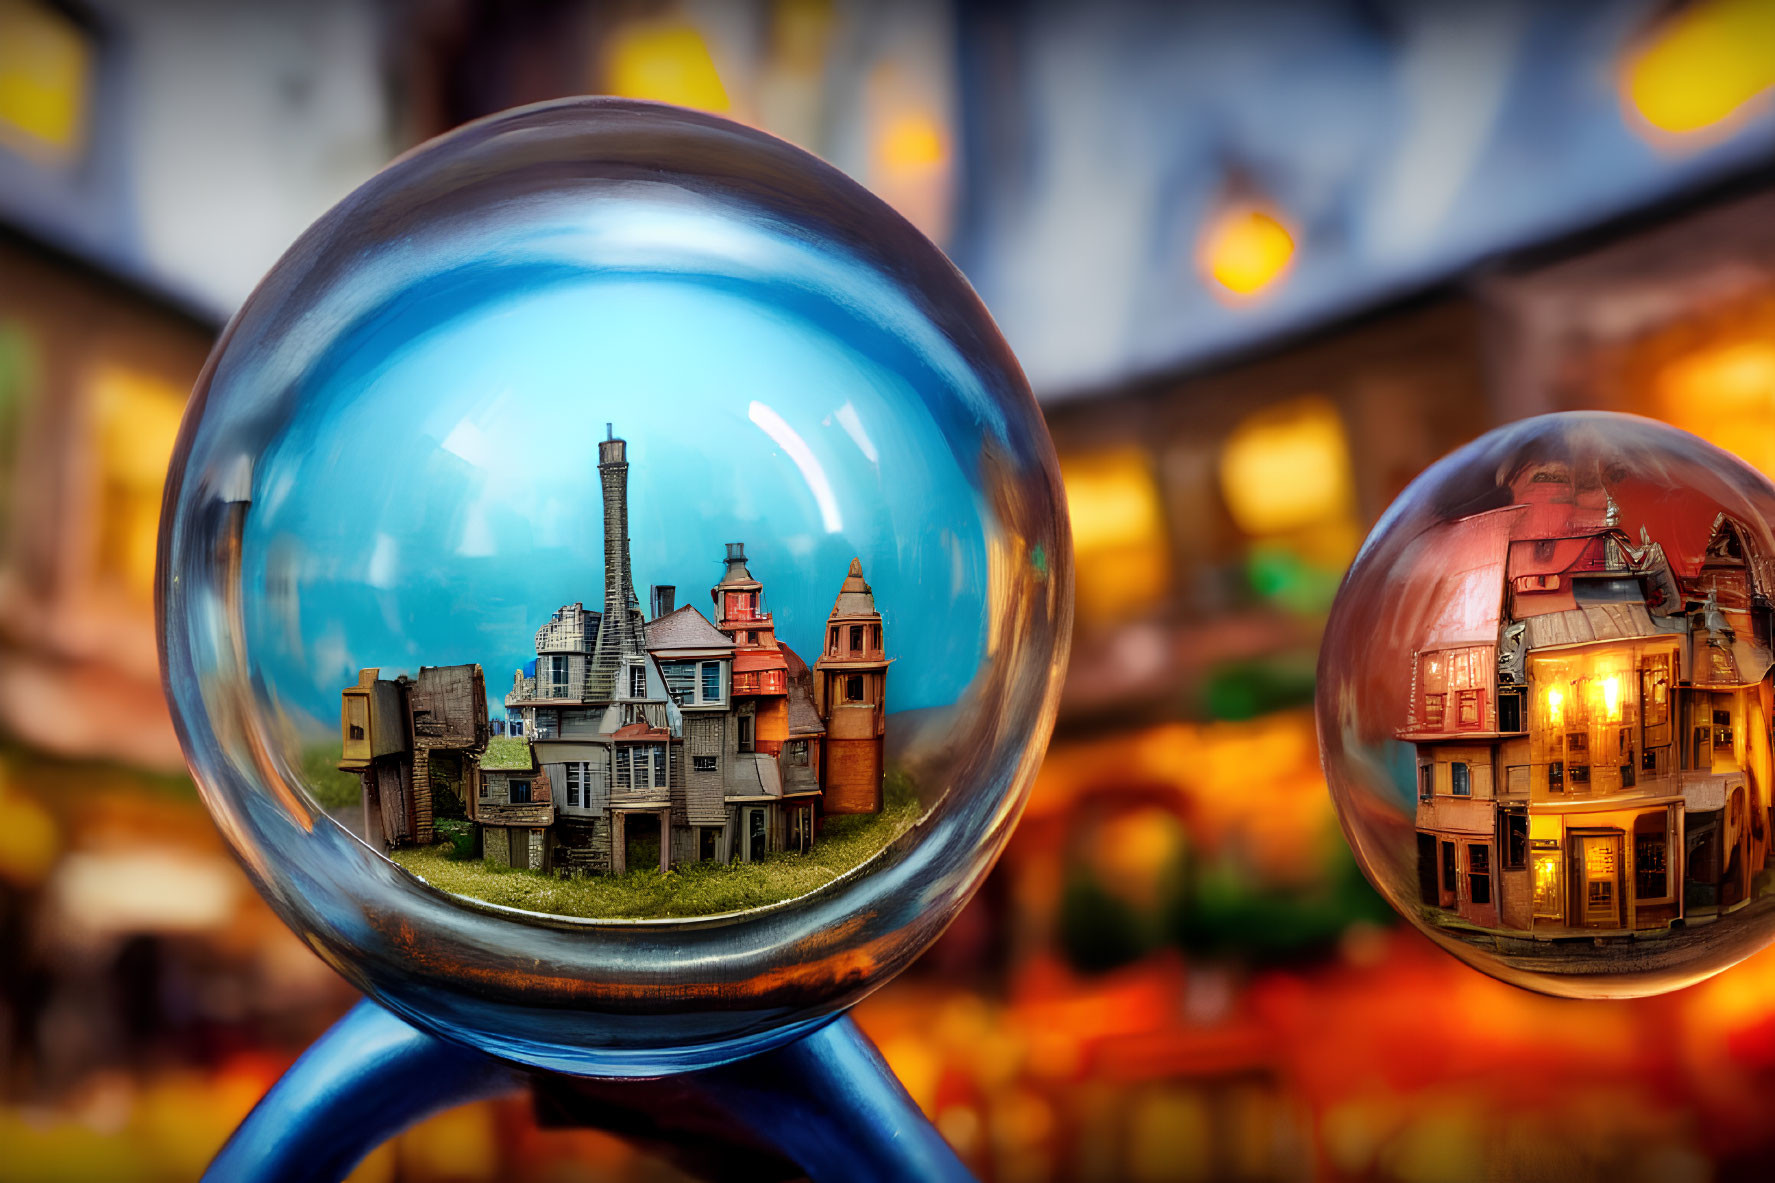 Crystal balls reflecting distorted colorful buildings and tower on stands.